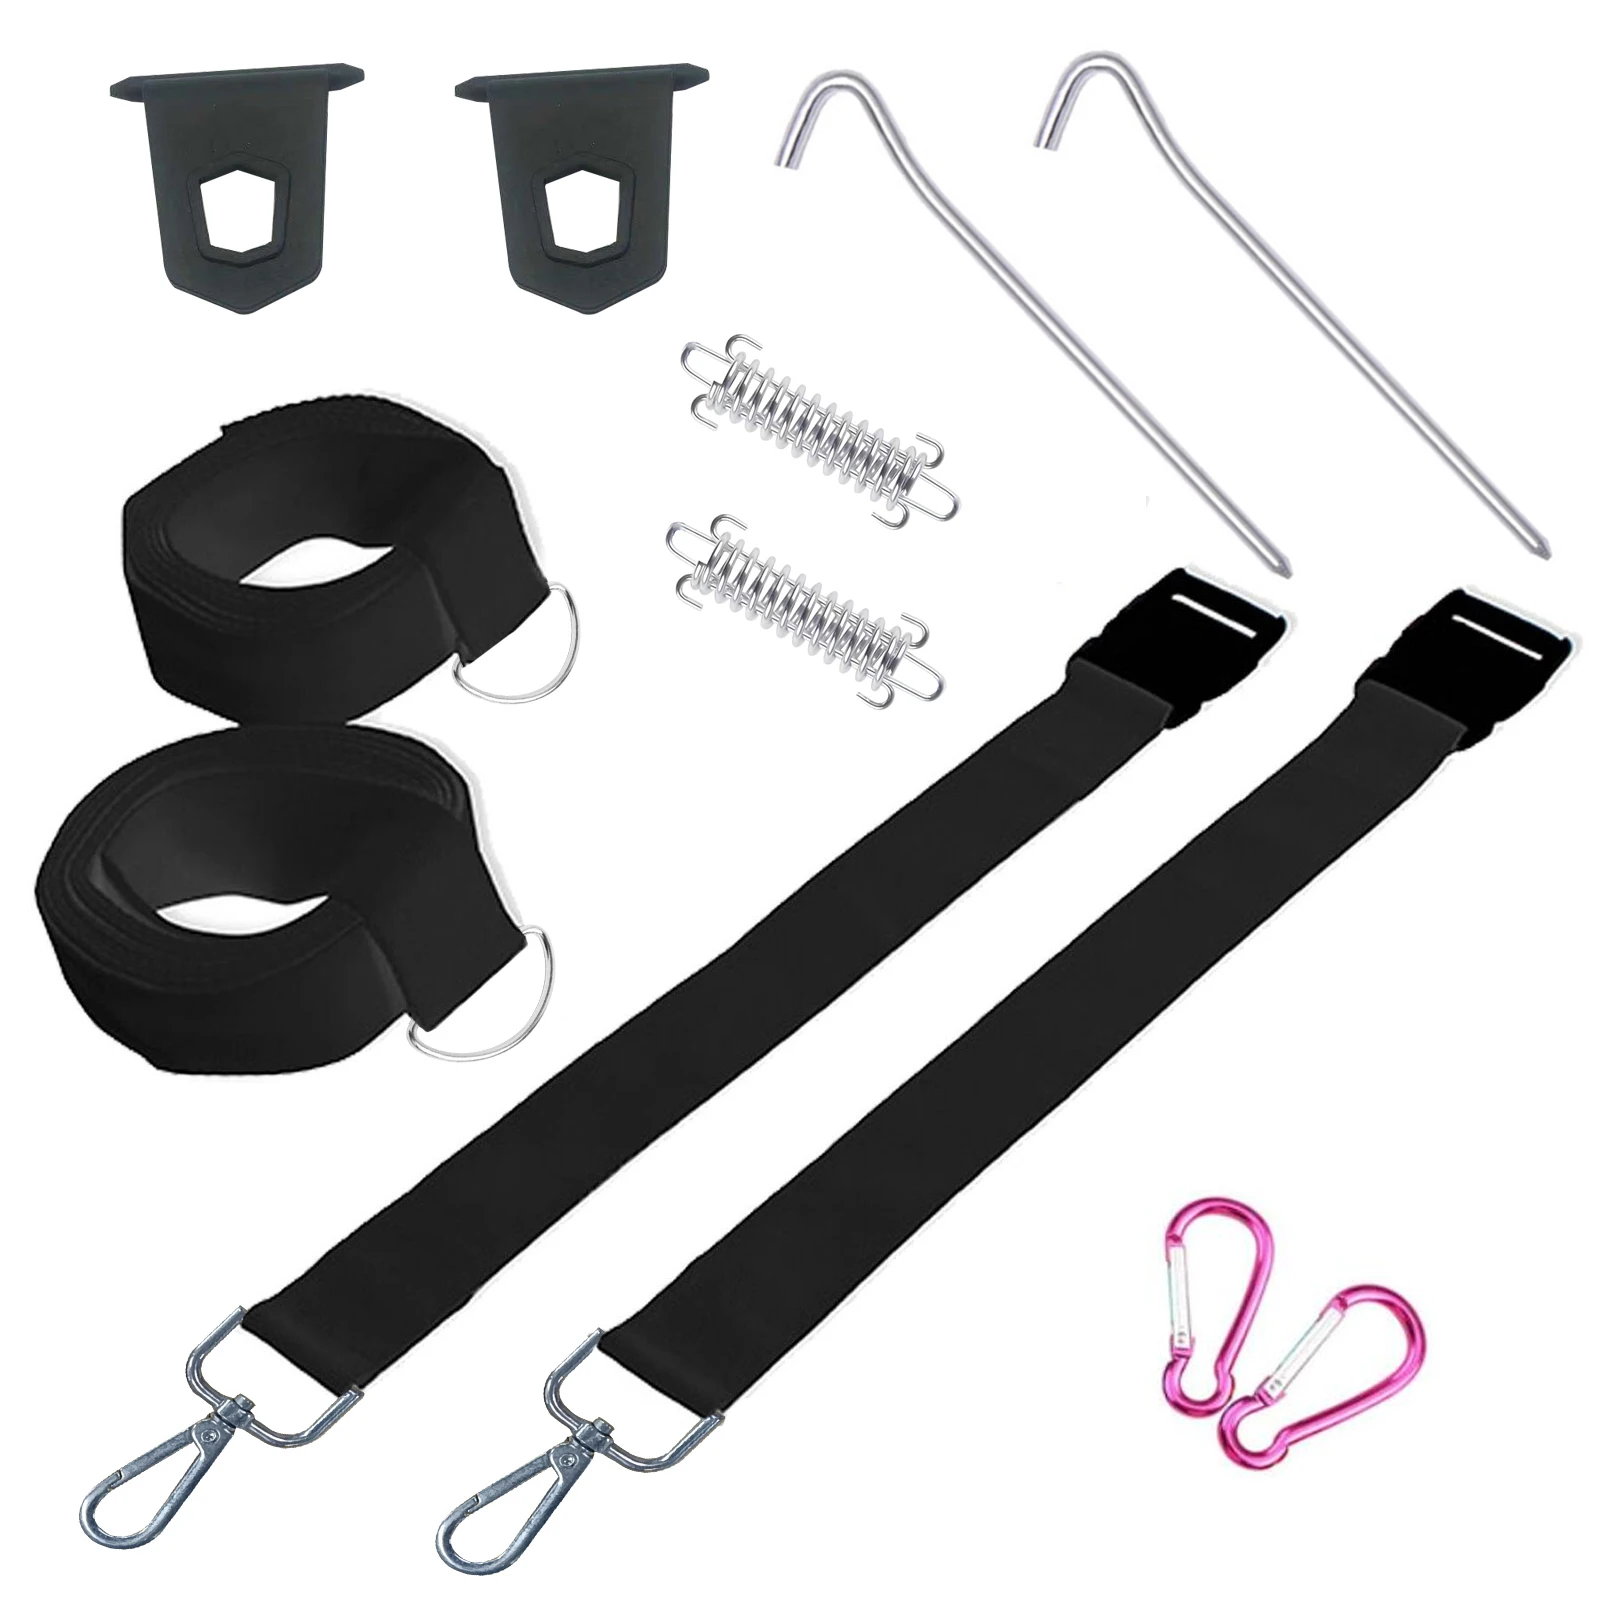 For Fiamma Awning Tie Down Kit Type S Black For F35 F45 F65 Caravan Motorhome Outdoor Camping Tool